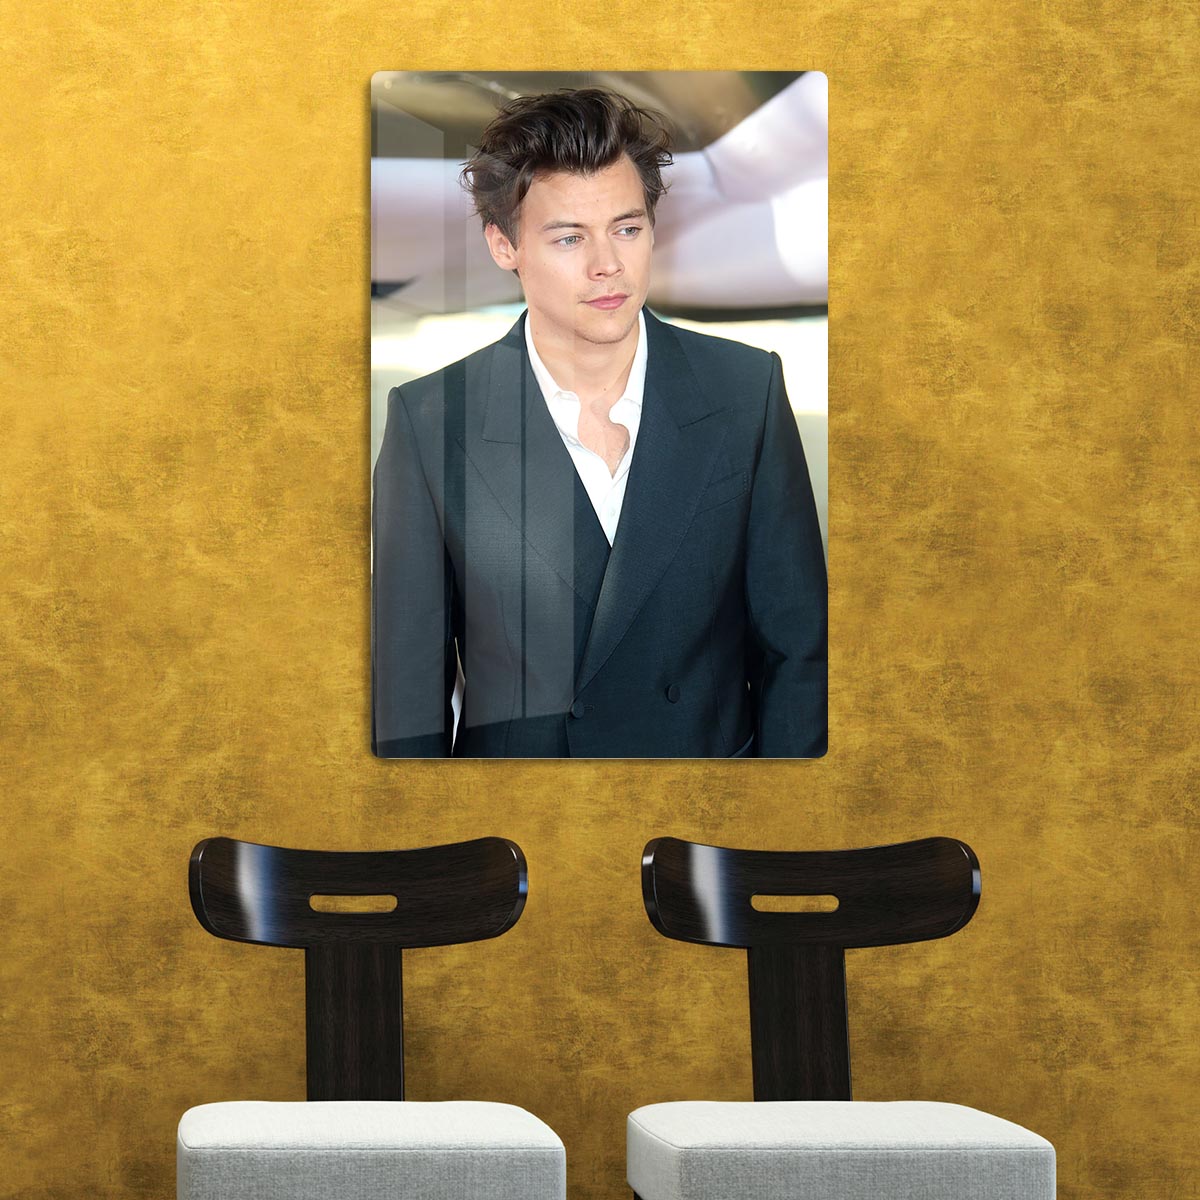 Harry Styles from One Direction HD Metal Print